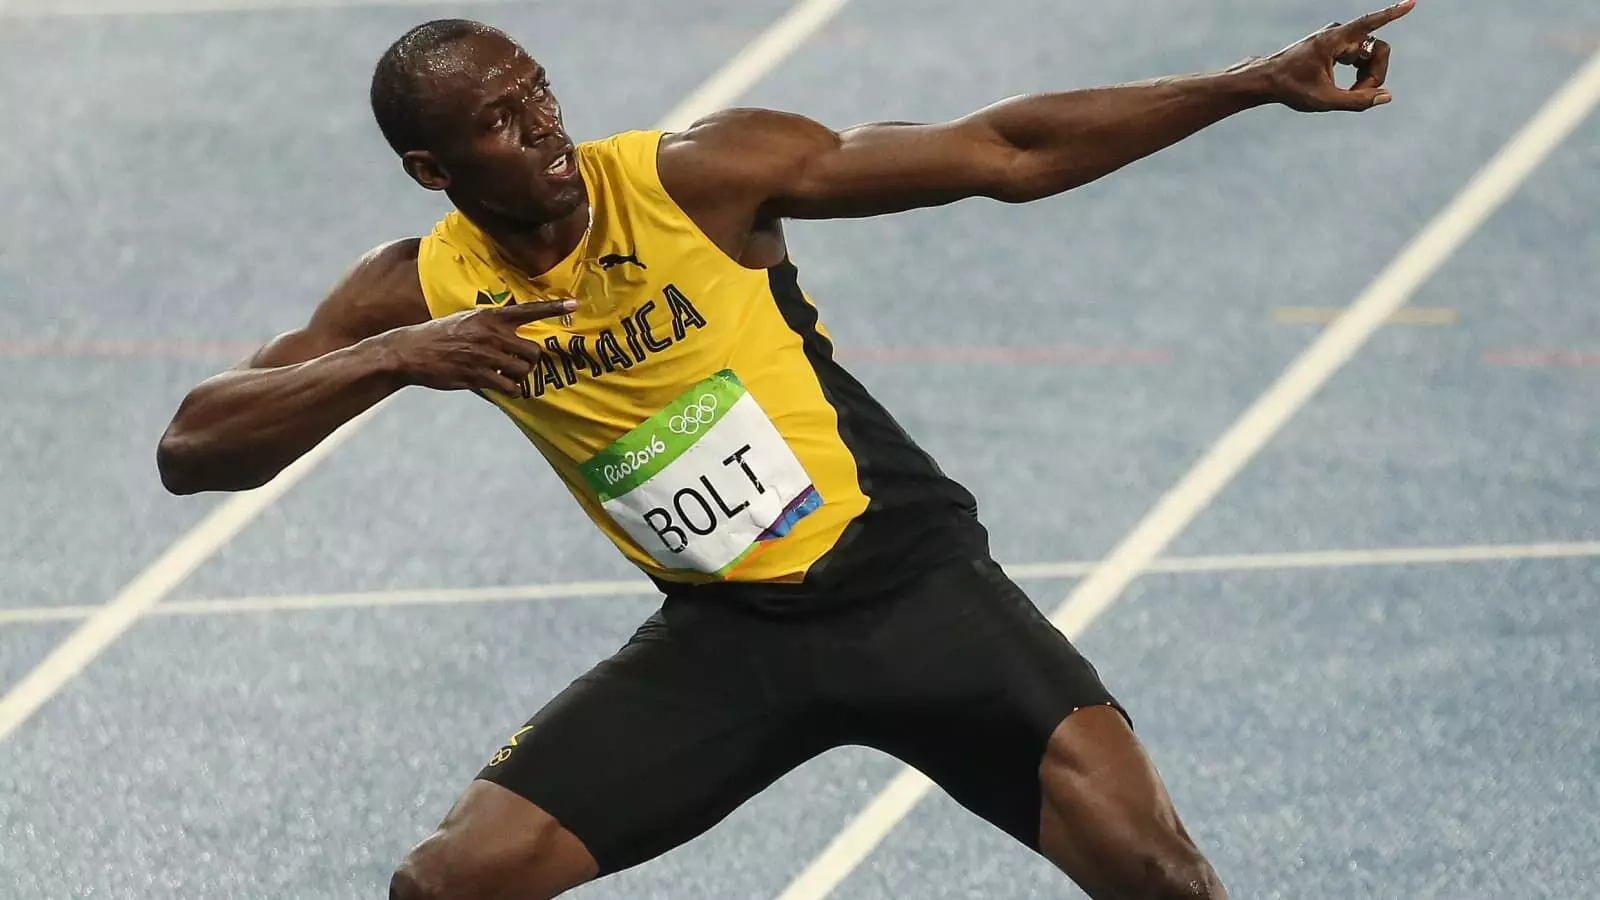 I've seen people ask why 343 hasn't released the Podium Finish stance yet,  and I think the answer has to do with the unclear status of Usain Bolt's  trademark application on his